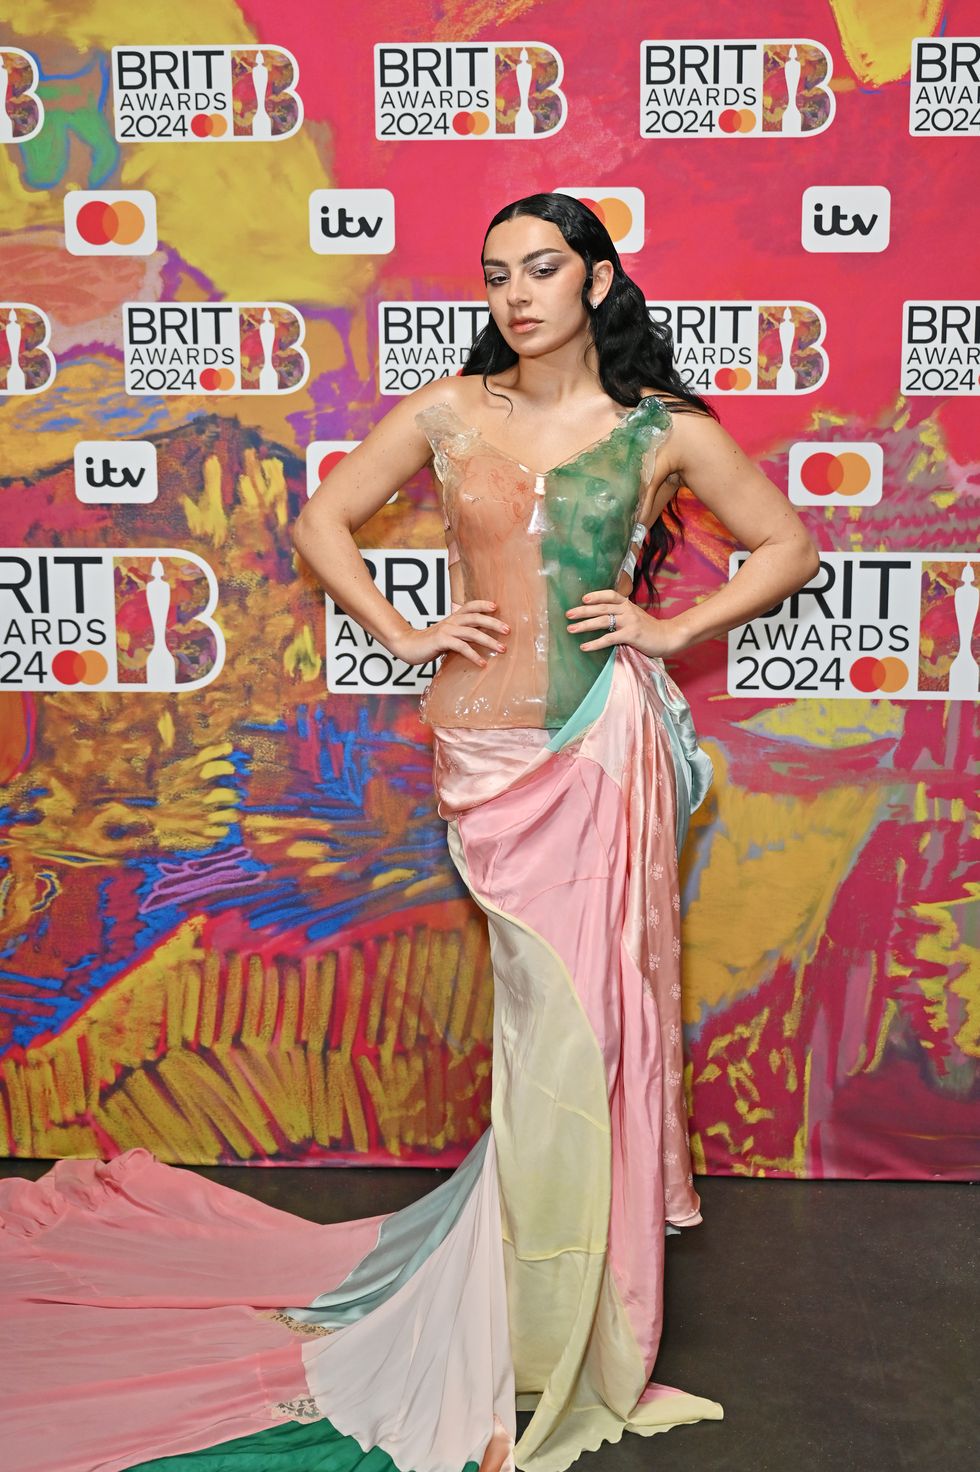 Charli XCX wears a work of art on the 2024 Brit Awards red carpet